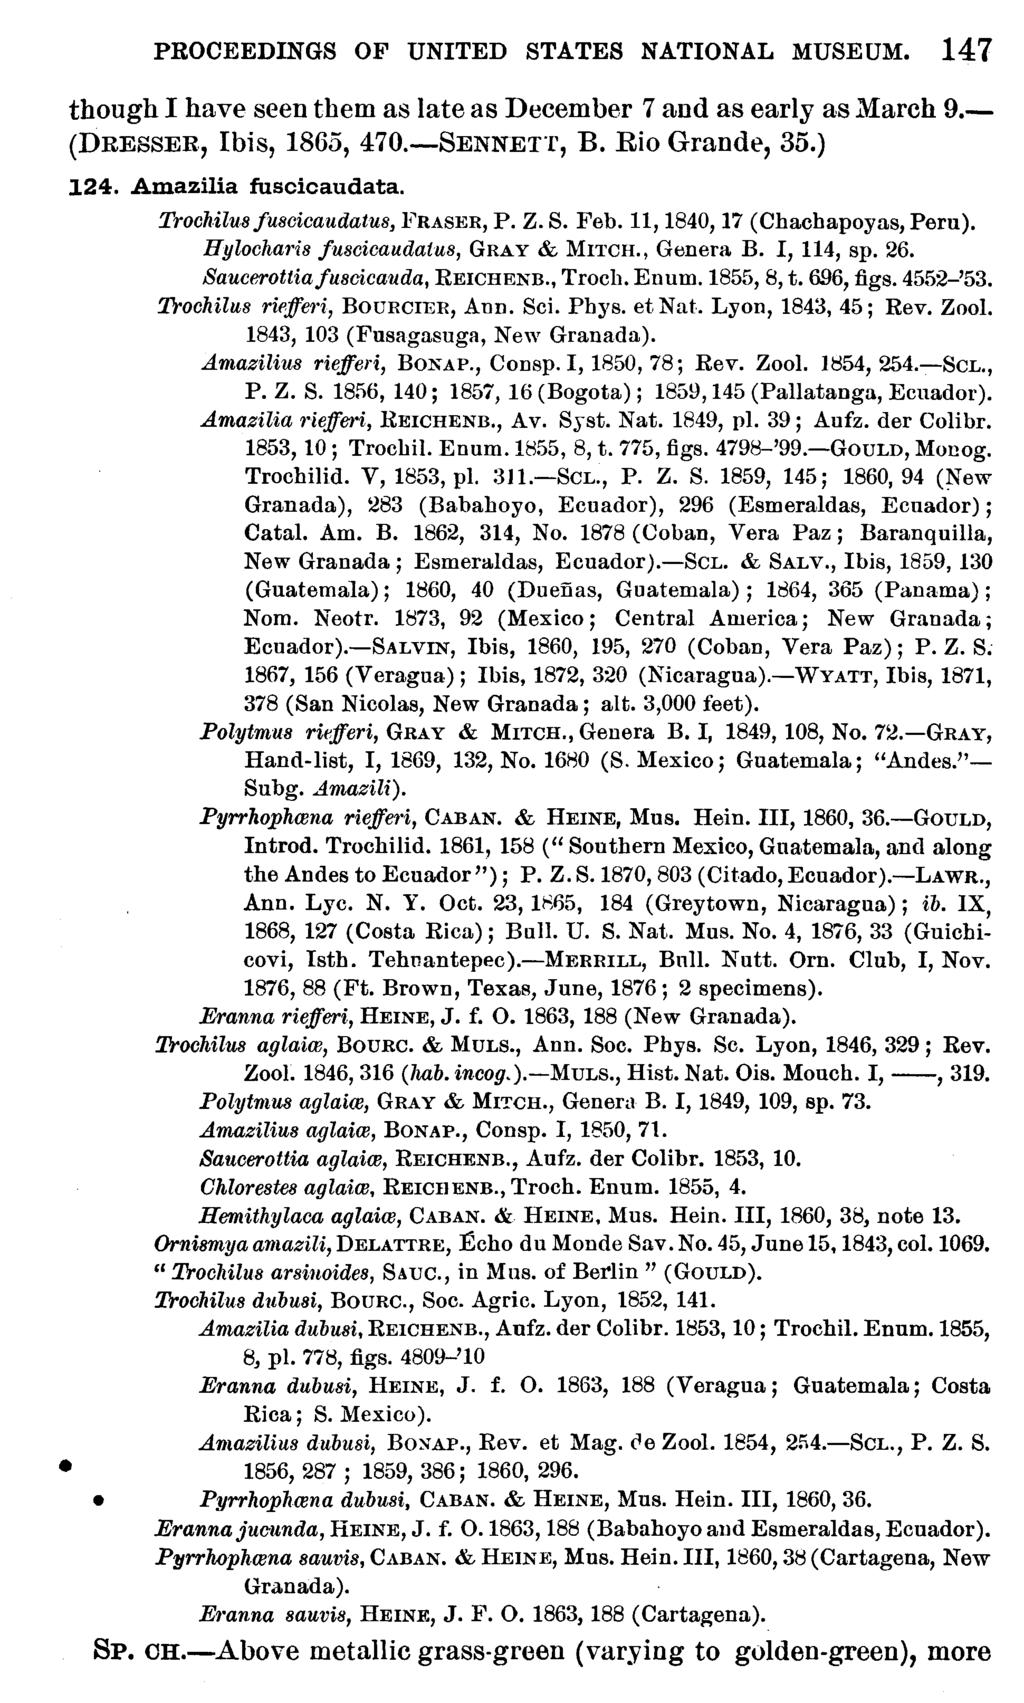 PROCEEDINGS OF UNITED STATES NATIONAL MUSEUM. 147 though I have seen them as late as December 7 and as early as March 9. (DRESSER., Ibis, 1865, 470.-SENNETT, B. Rio Grande, 35.) 124.